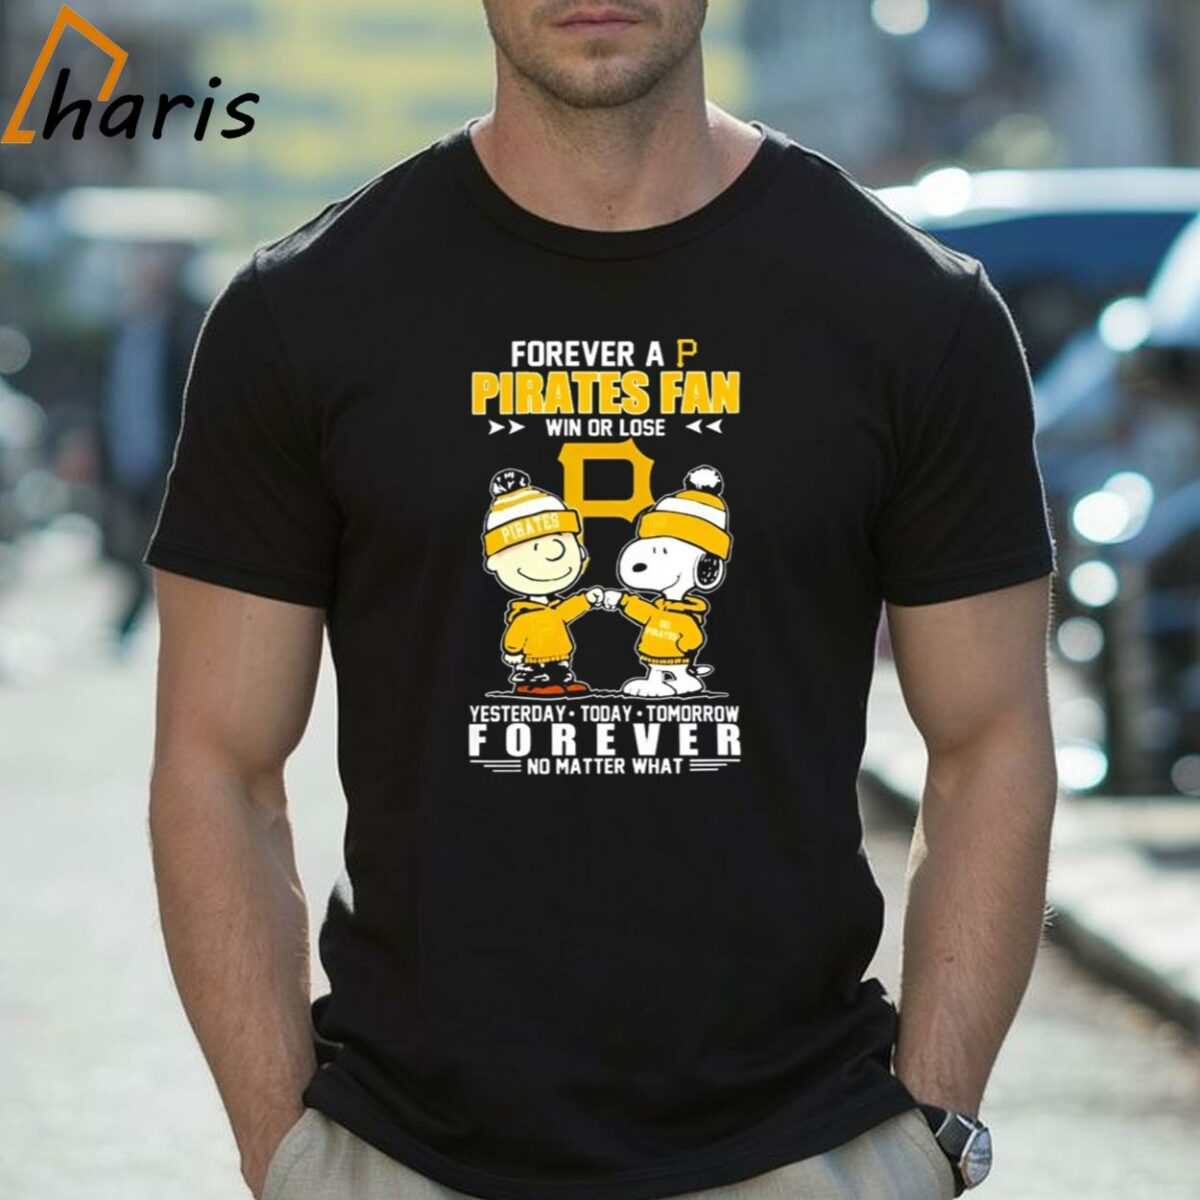 Snoopy And Charlie Brown Forever A Pirates Fan Win Or Lose Yesterday Today Tomorrow Forever No Matter What Shirt 2 Shirt